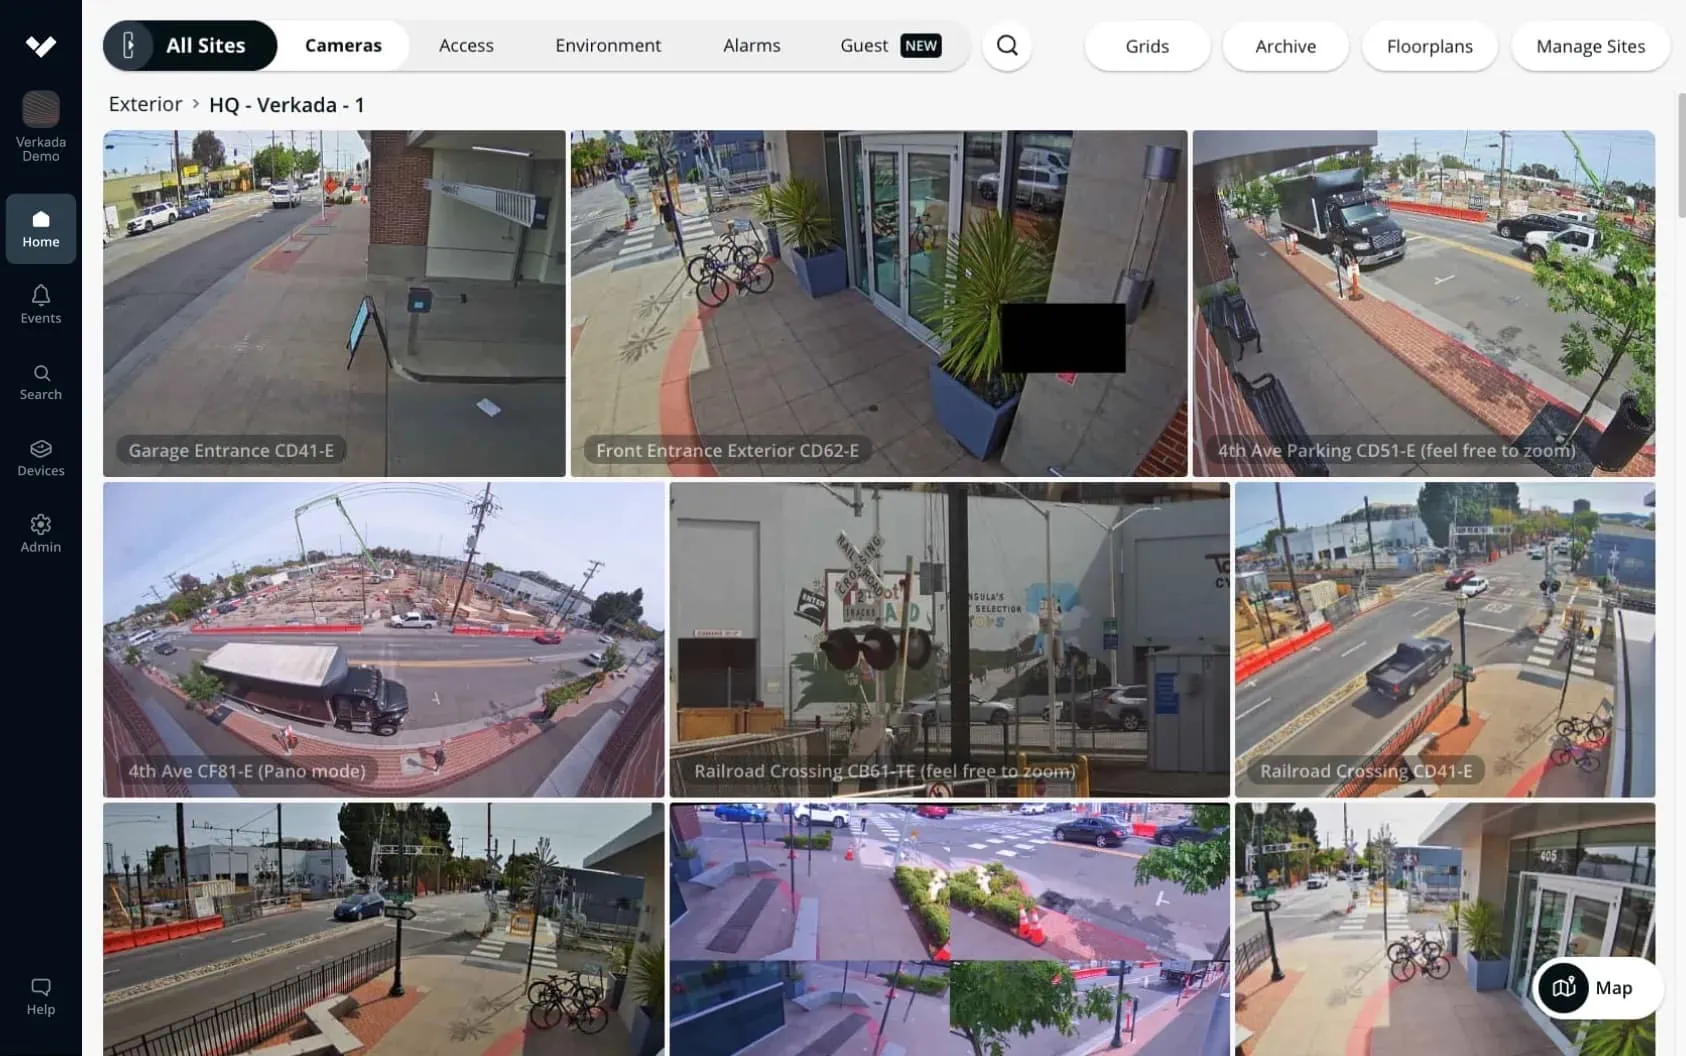 Command interface displaying footage from security cameras